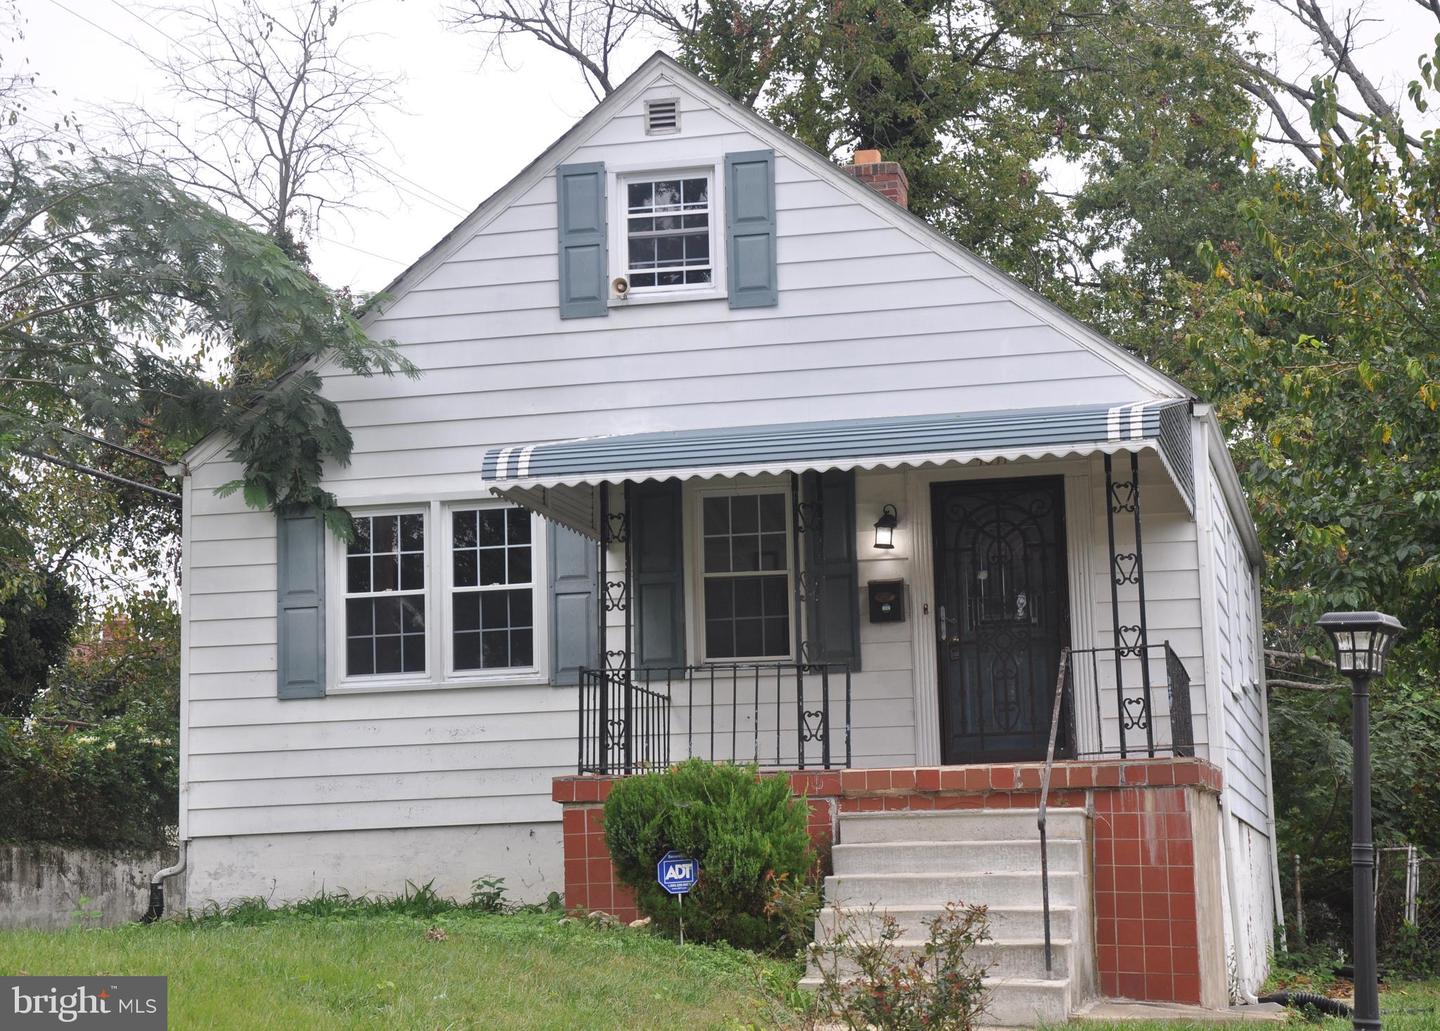 4811 Lanier Avenue, Baltimore, MD 21215 | MLS MDBA2000583 | Listing  Information | Homes for Sale and Rent